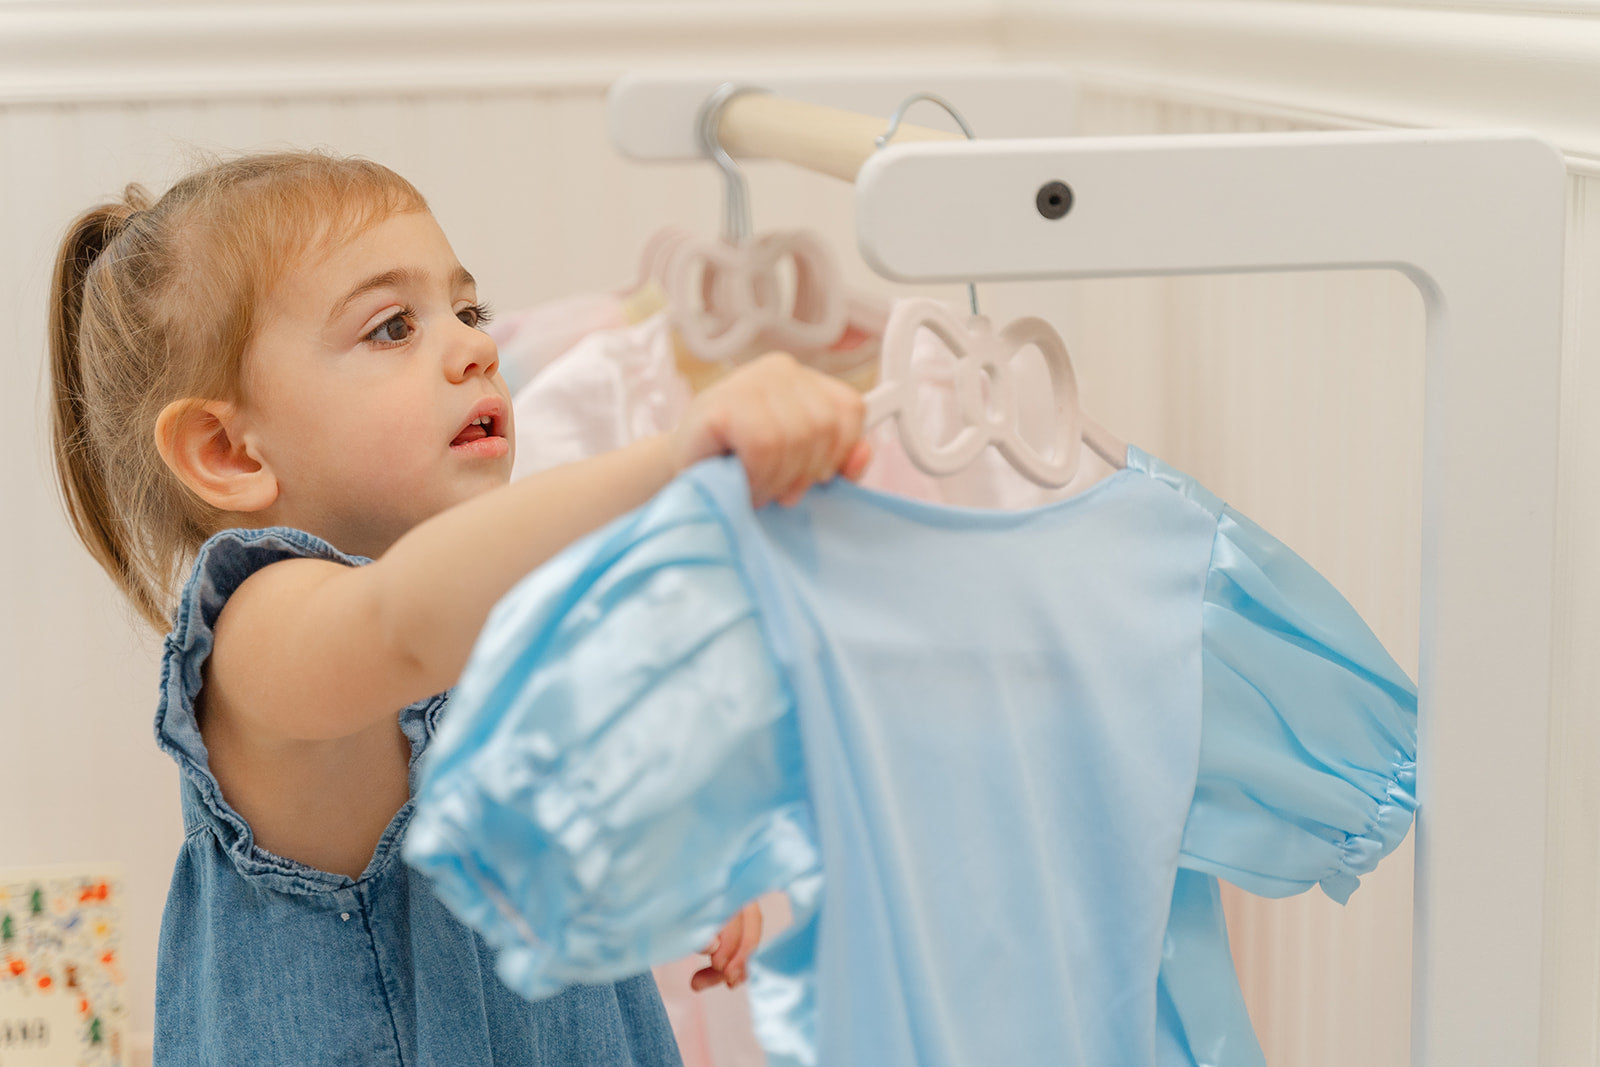 A child picking out a costume from a child-size clothing rack.